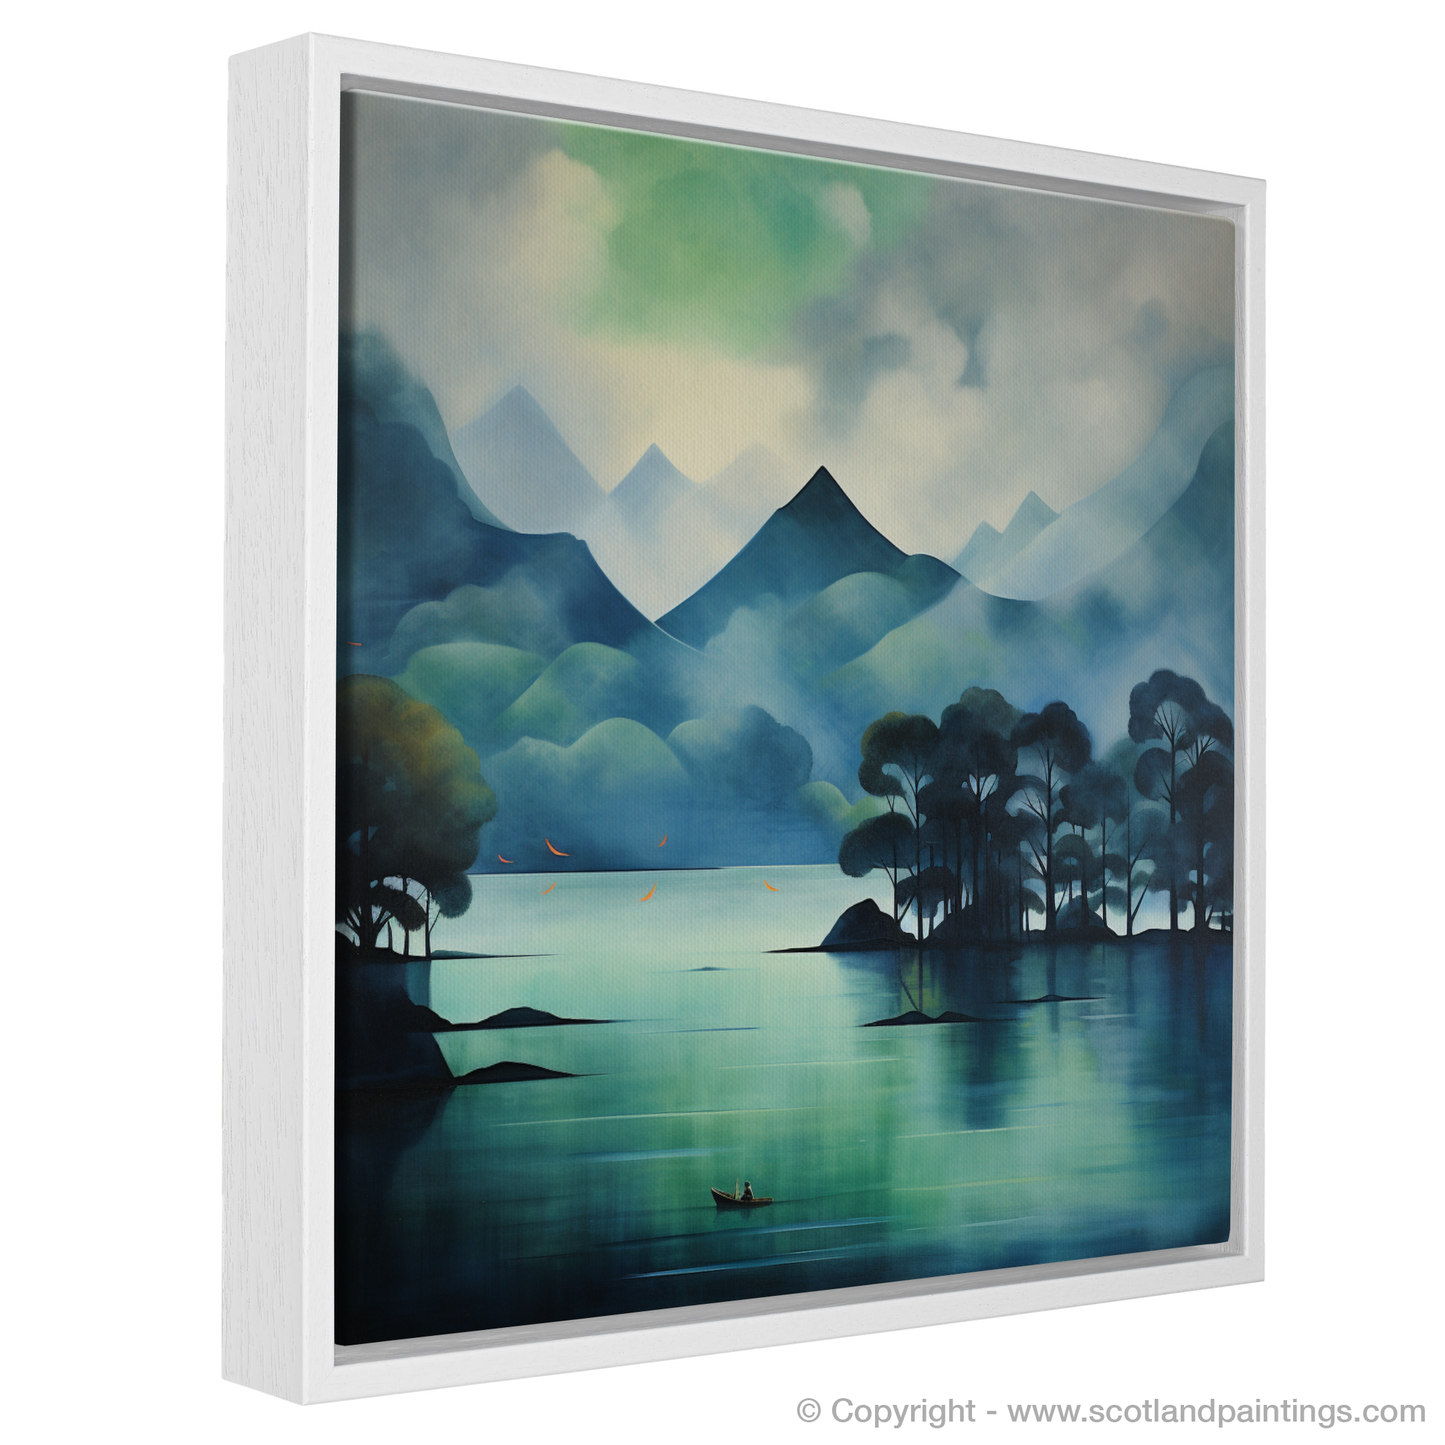 Painting and Art Print of Misty morning on Loch Lomond entitled "Misty Morning Majesty on Loch Lomond".